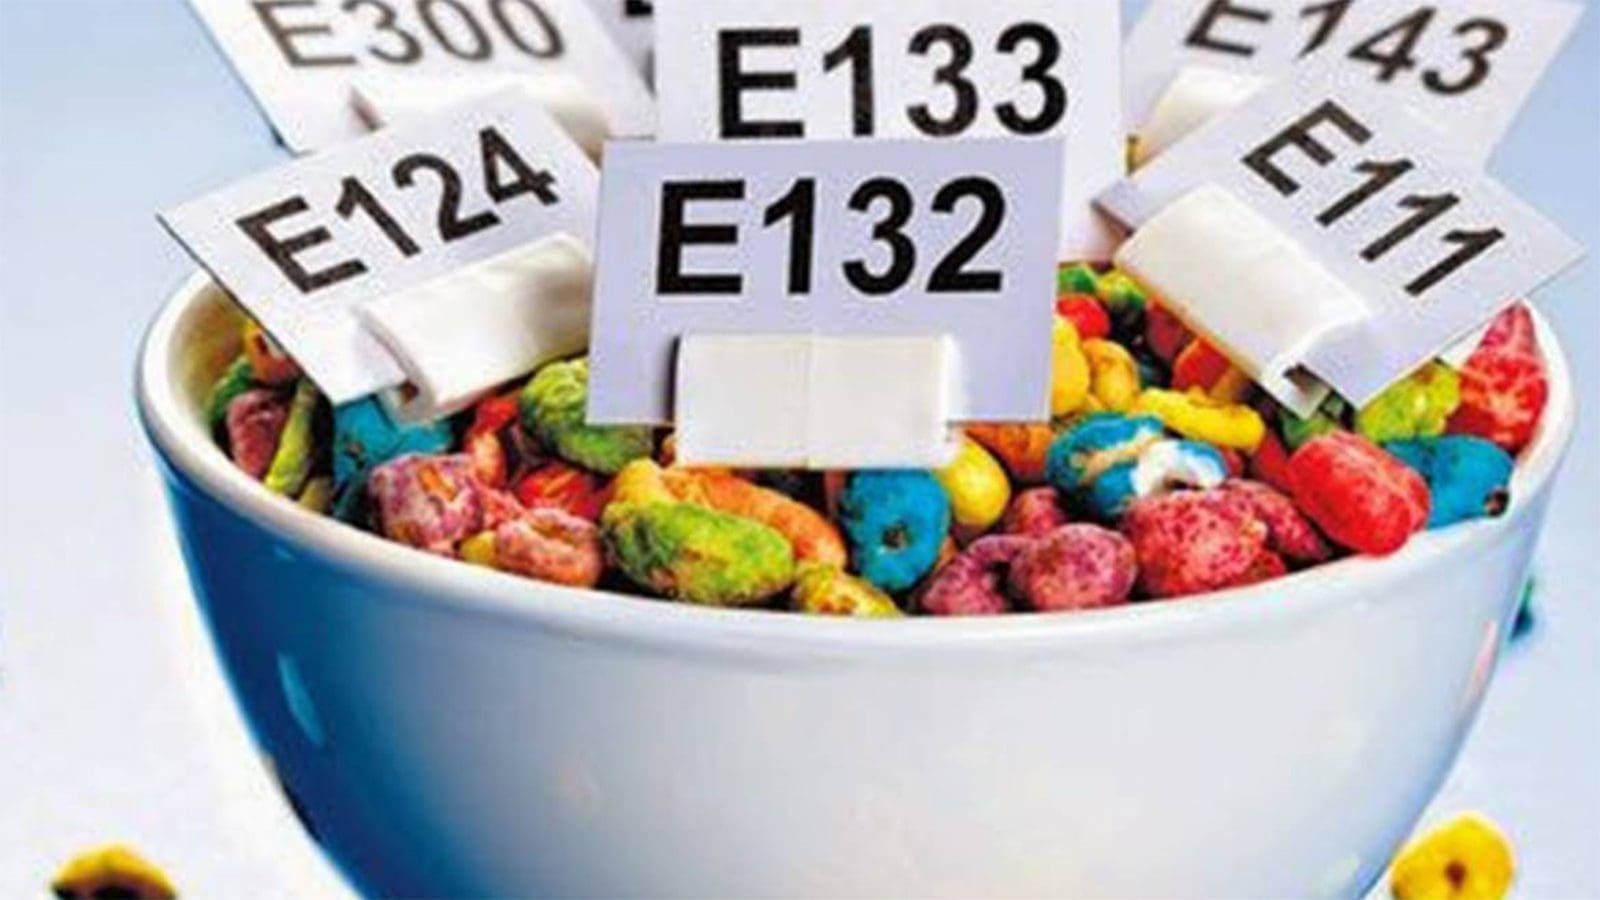 Illinois takes  cue from California, proposes ban on four food additives